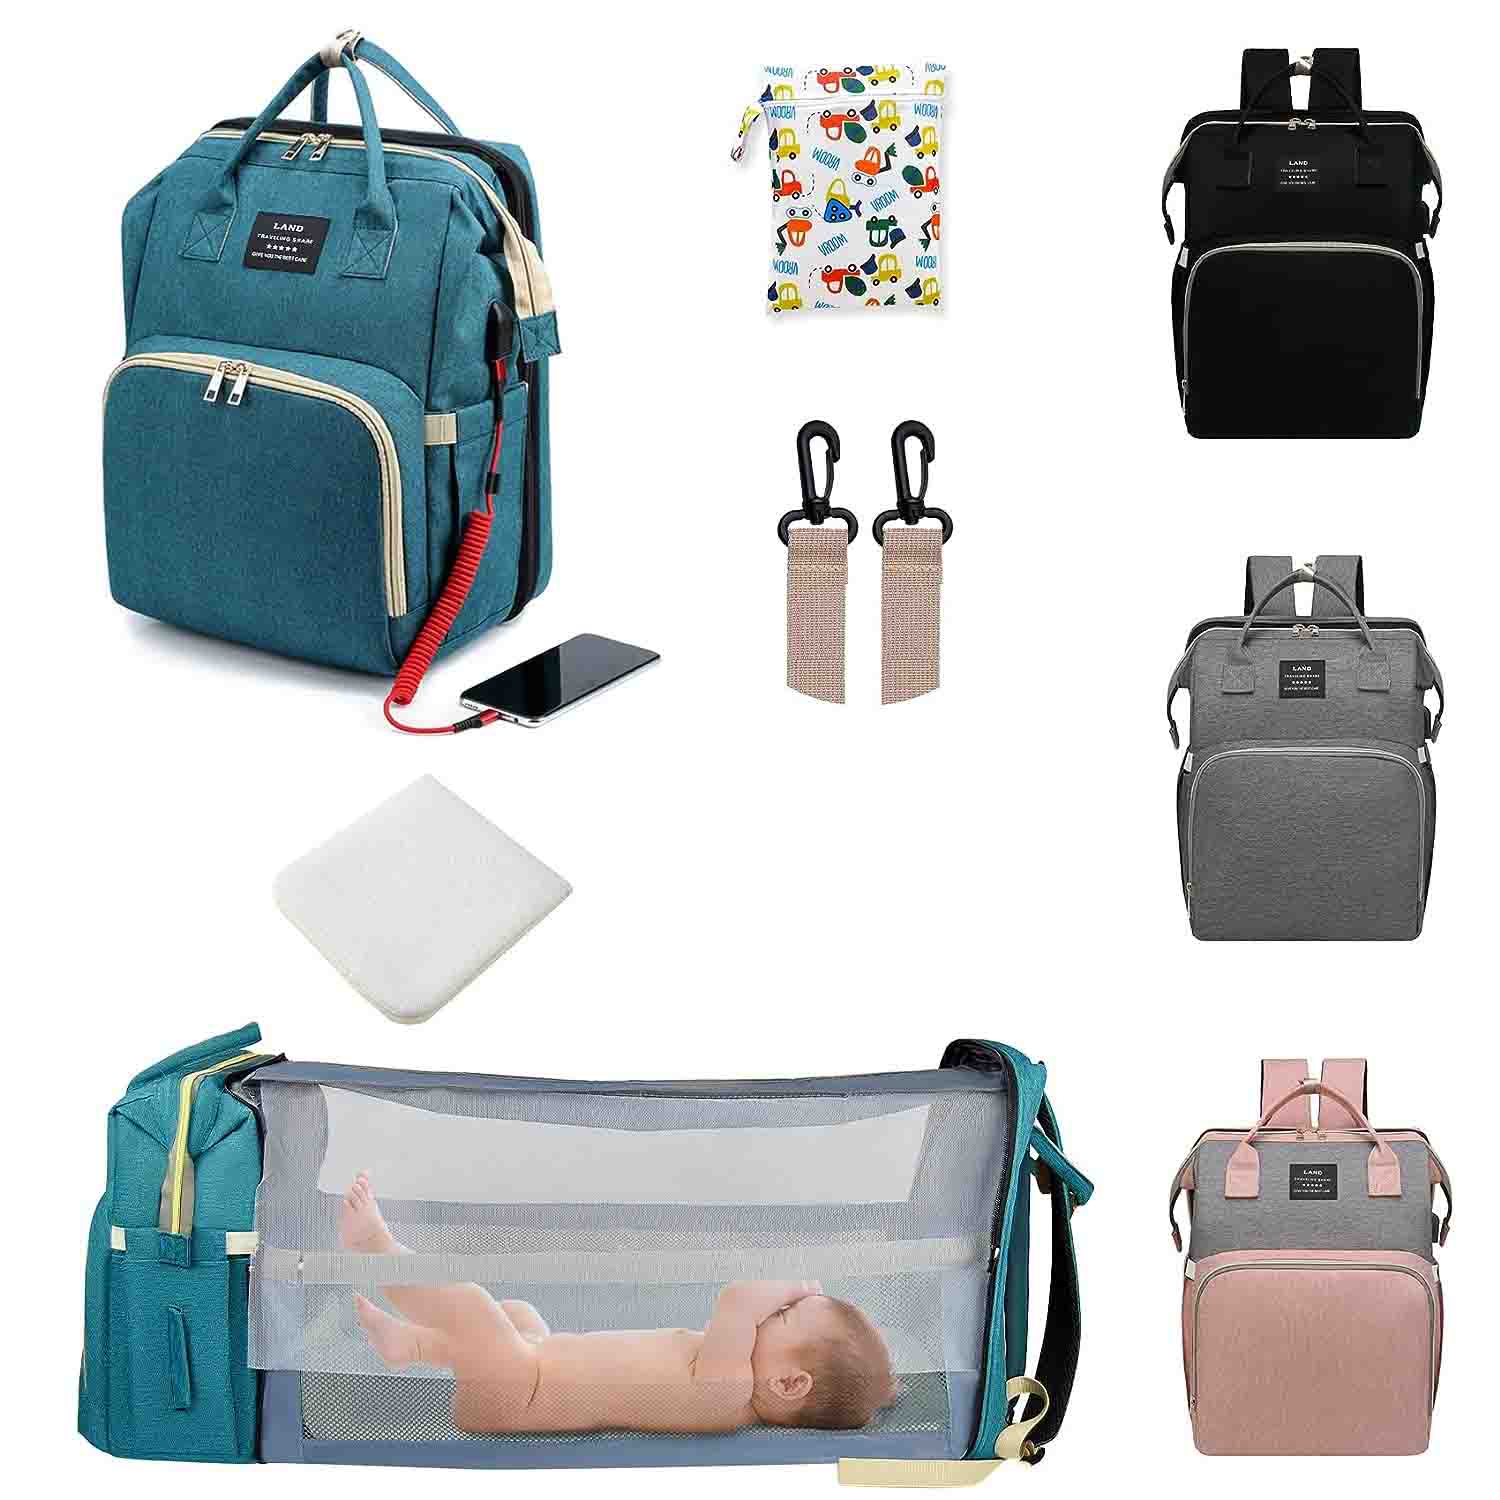 Antwotu backpacks in different color and a diaper change setup